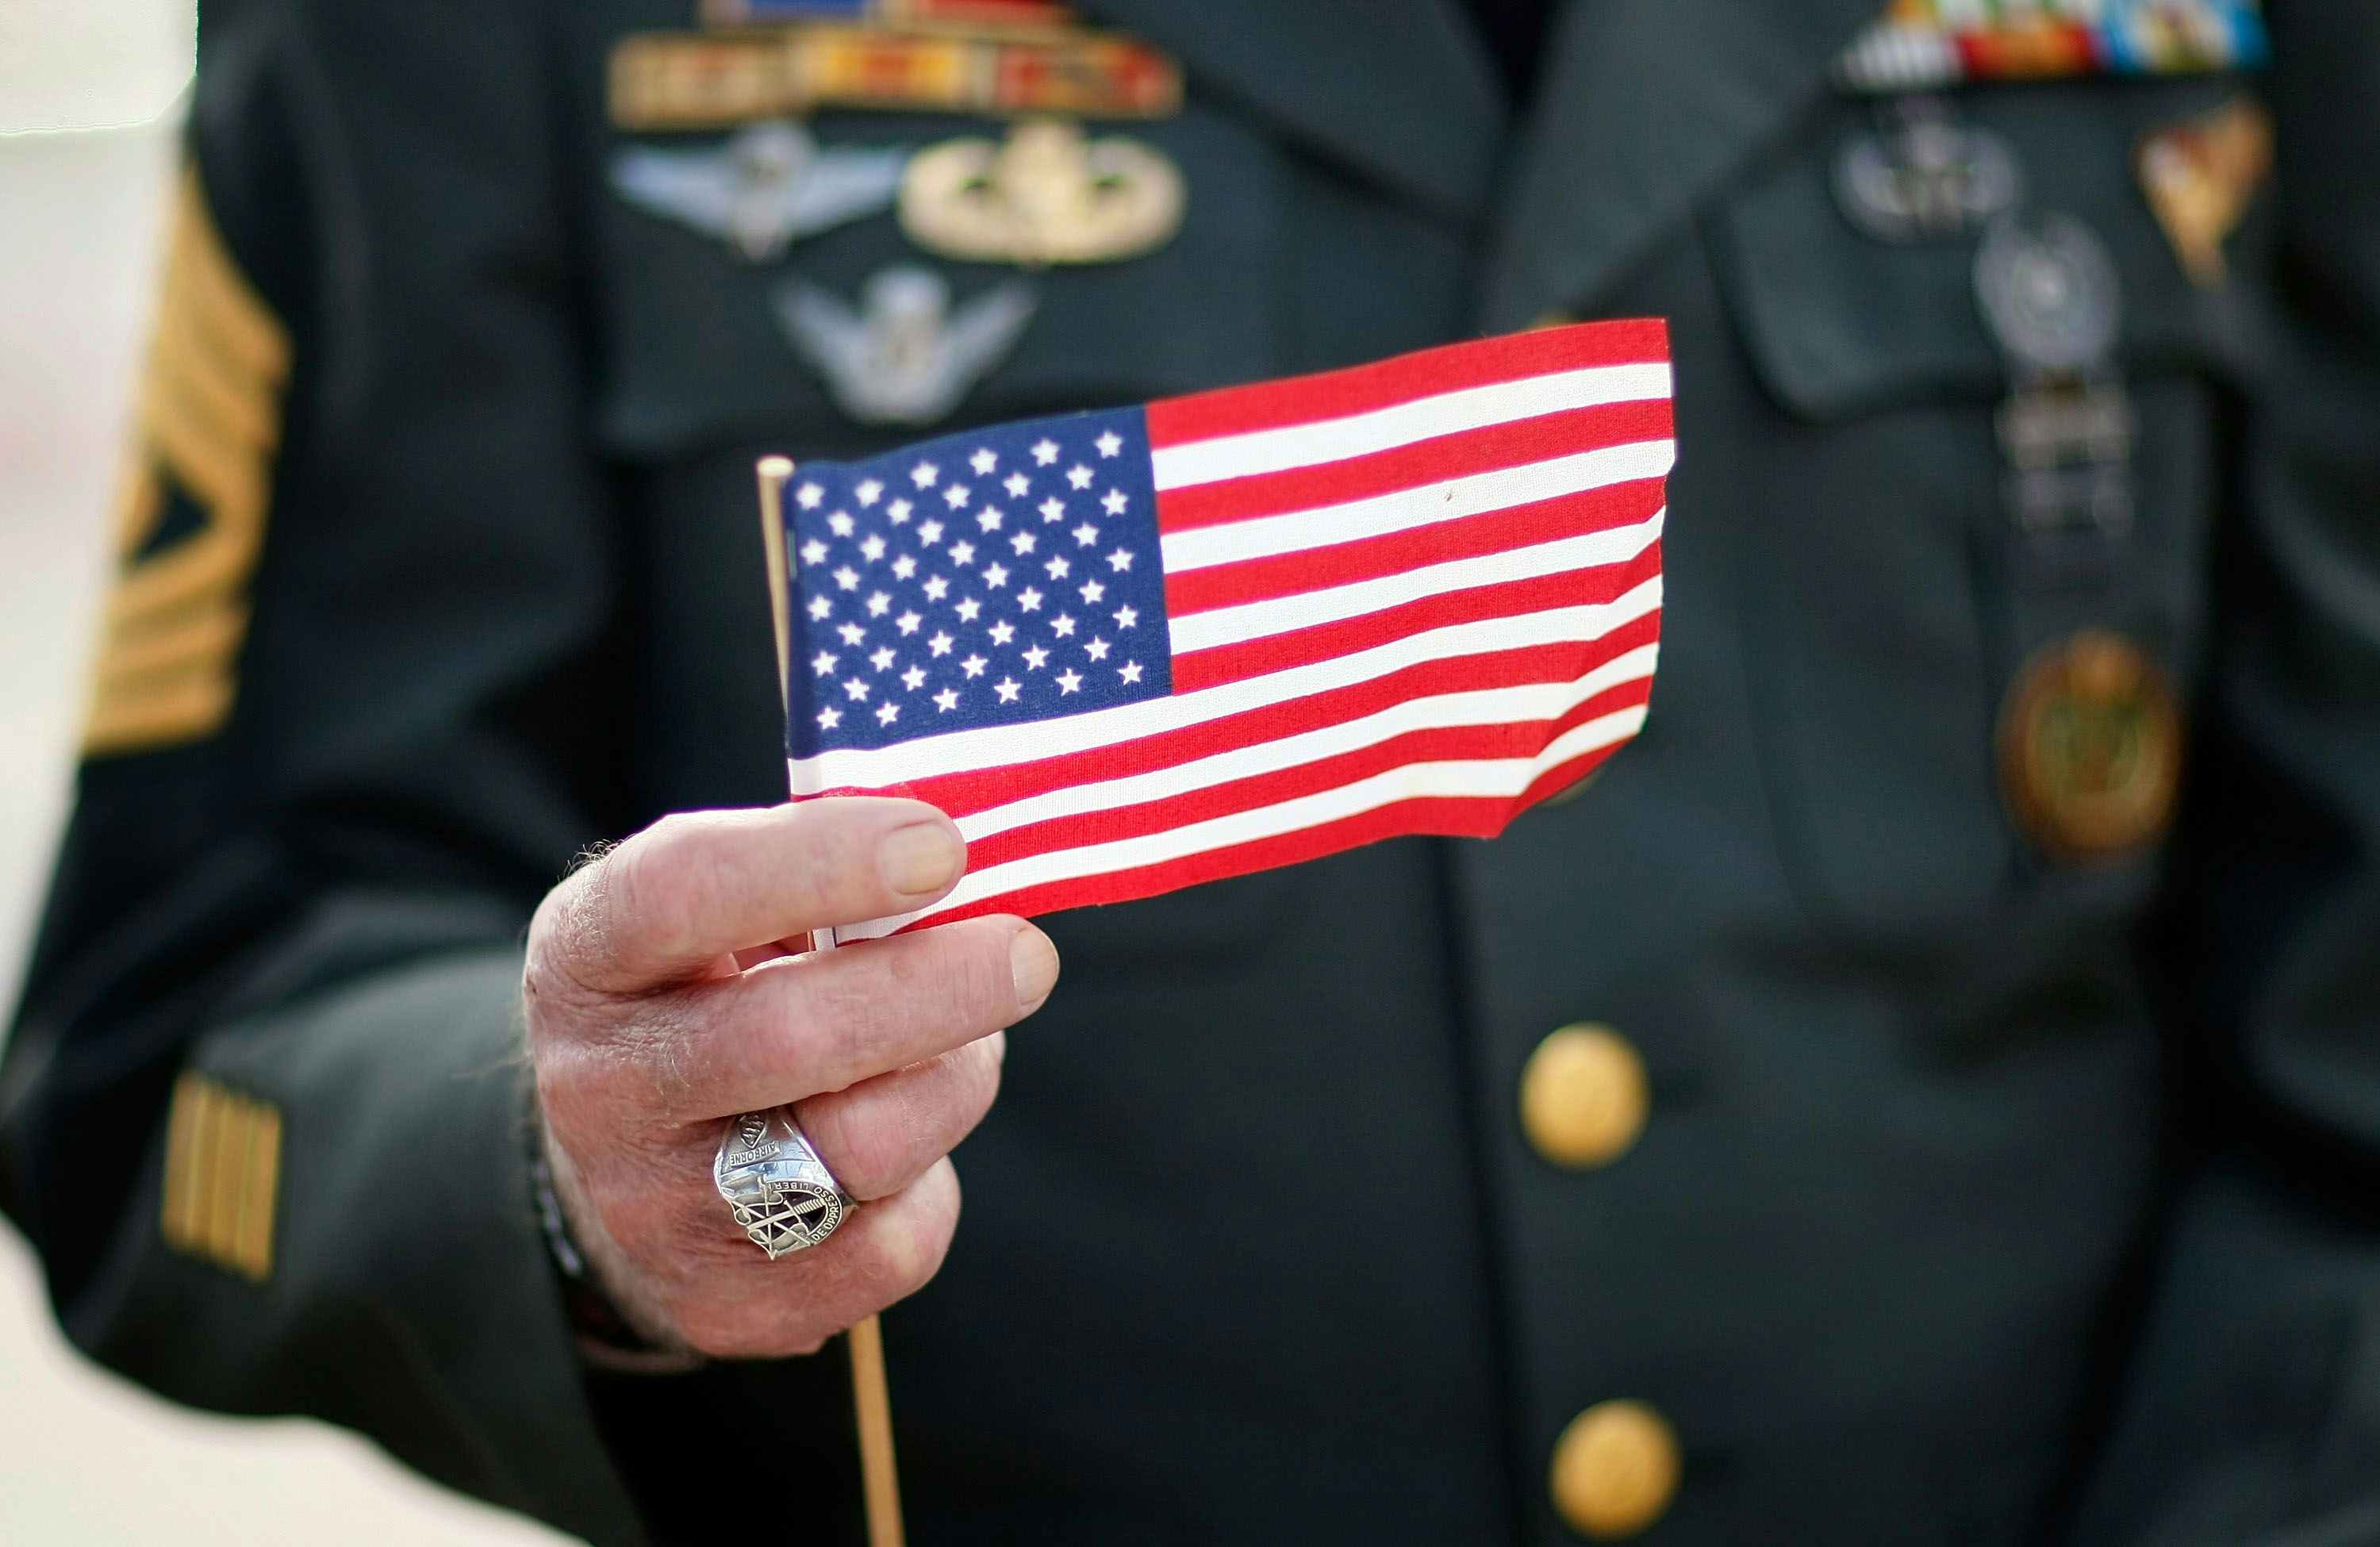 A small American flag being held up by a military veteran in uniform.